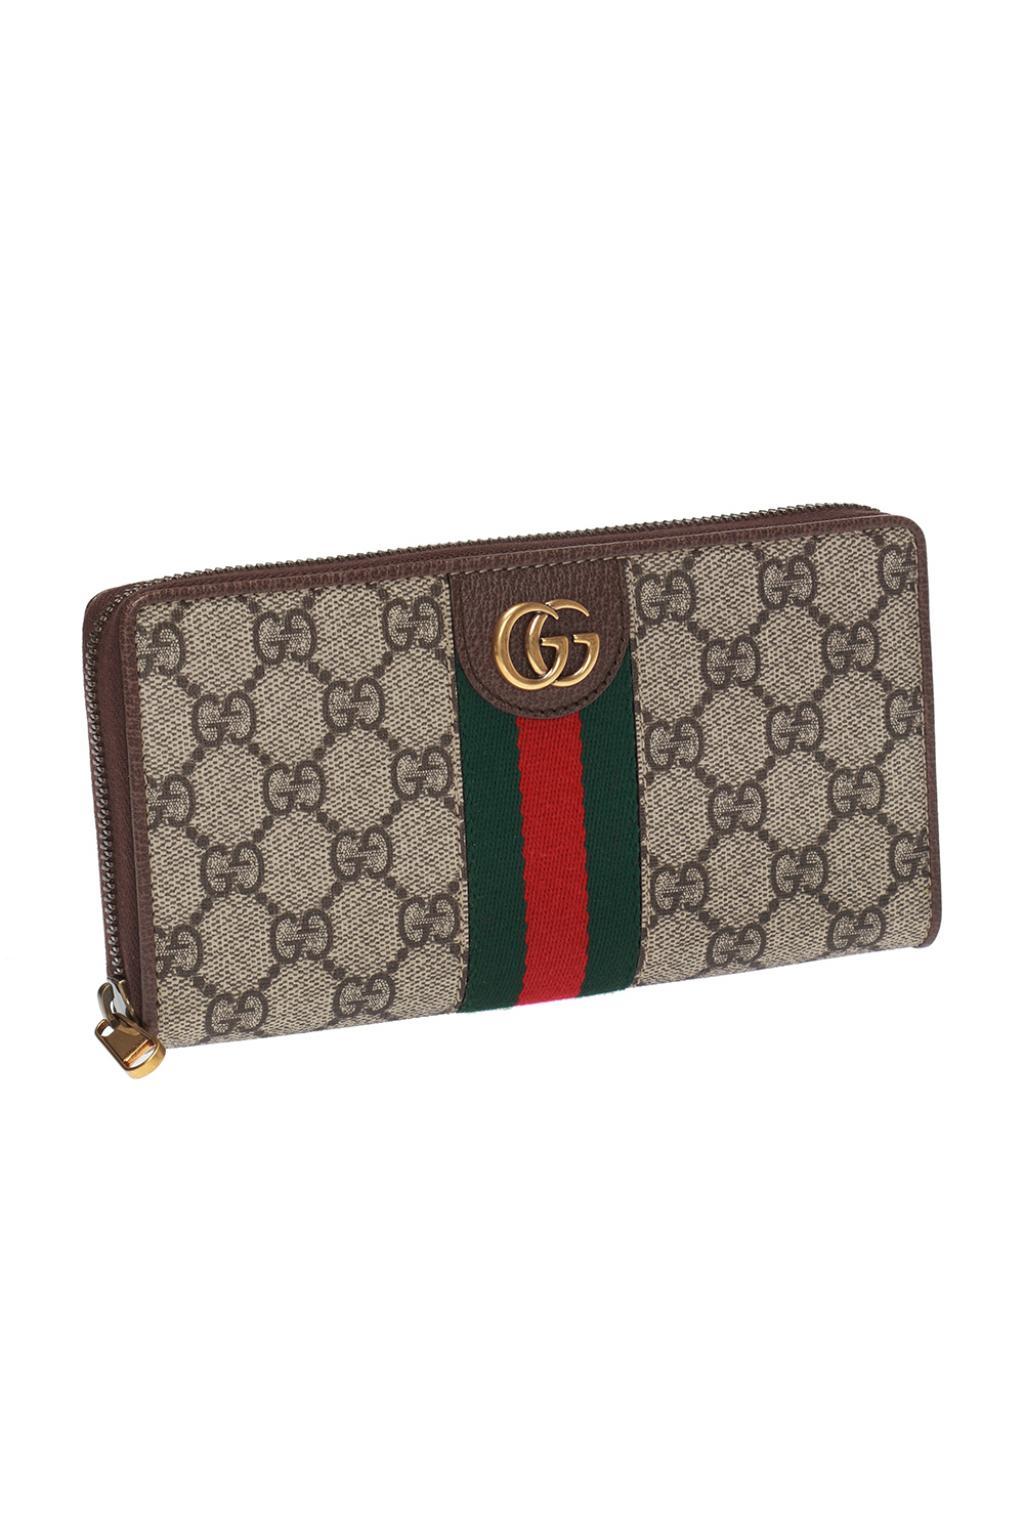 Gucci &#39;GG Supreme&#39; Canvas Wallet in Brown for Men - Lyst